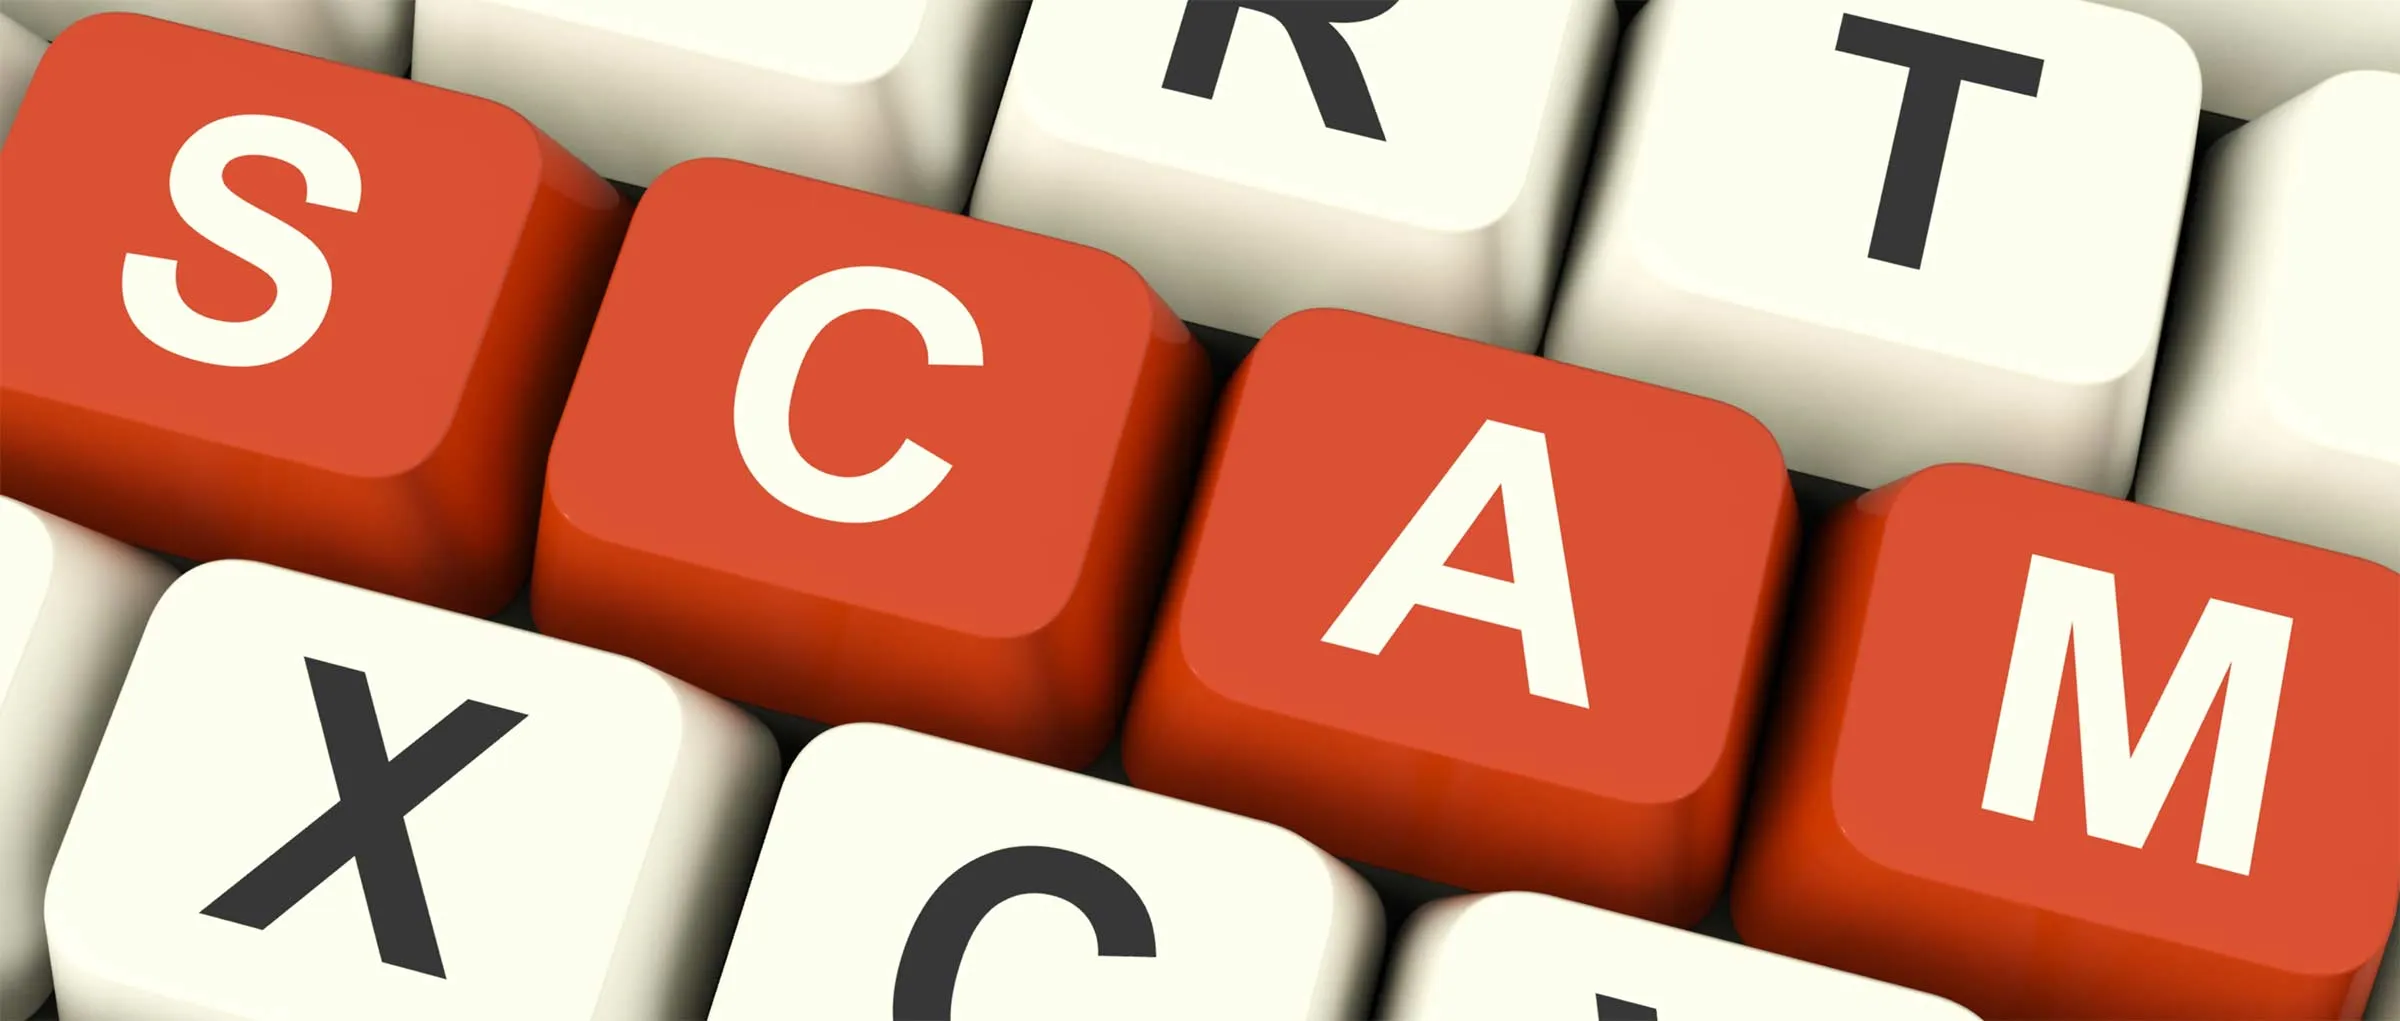 Personal Loan Scams: How To Detect & Avoid Them | LoanNow